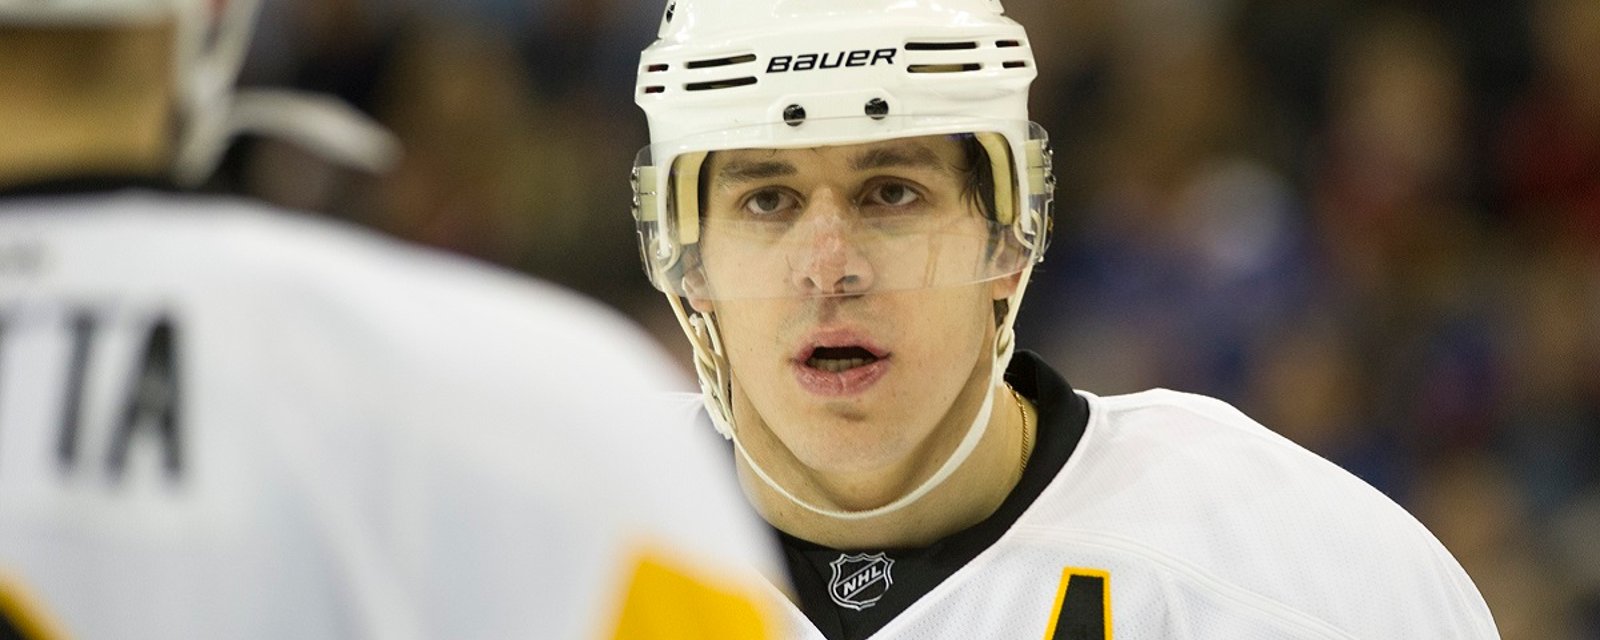 Malkin says there were no problems with Kessel, but there were with other Penguins.